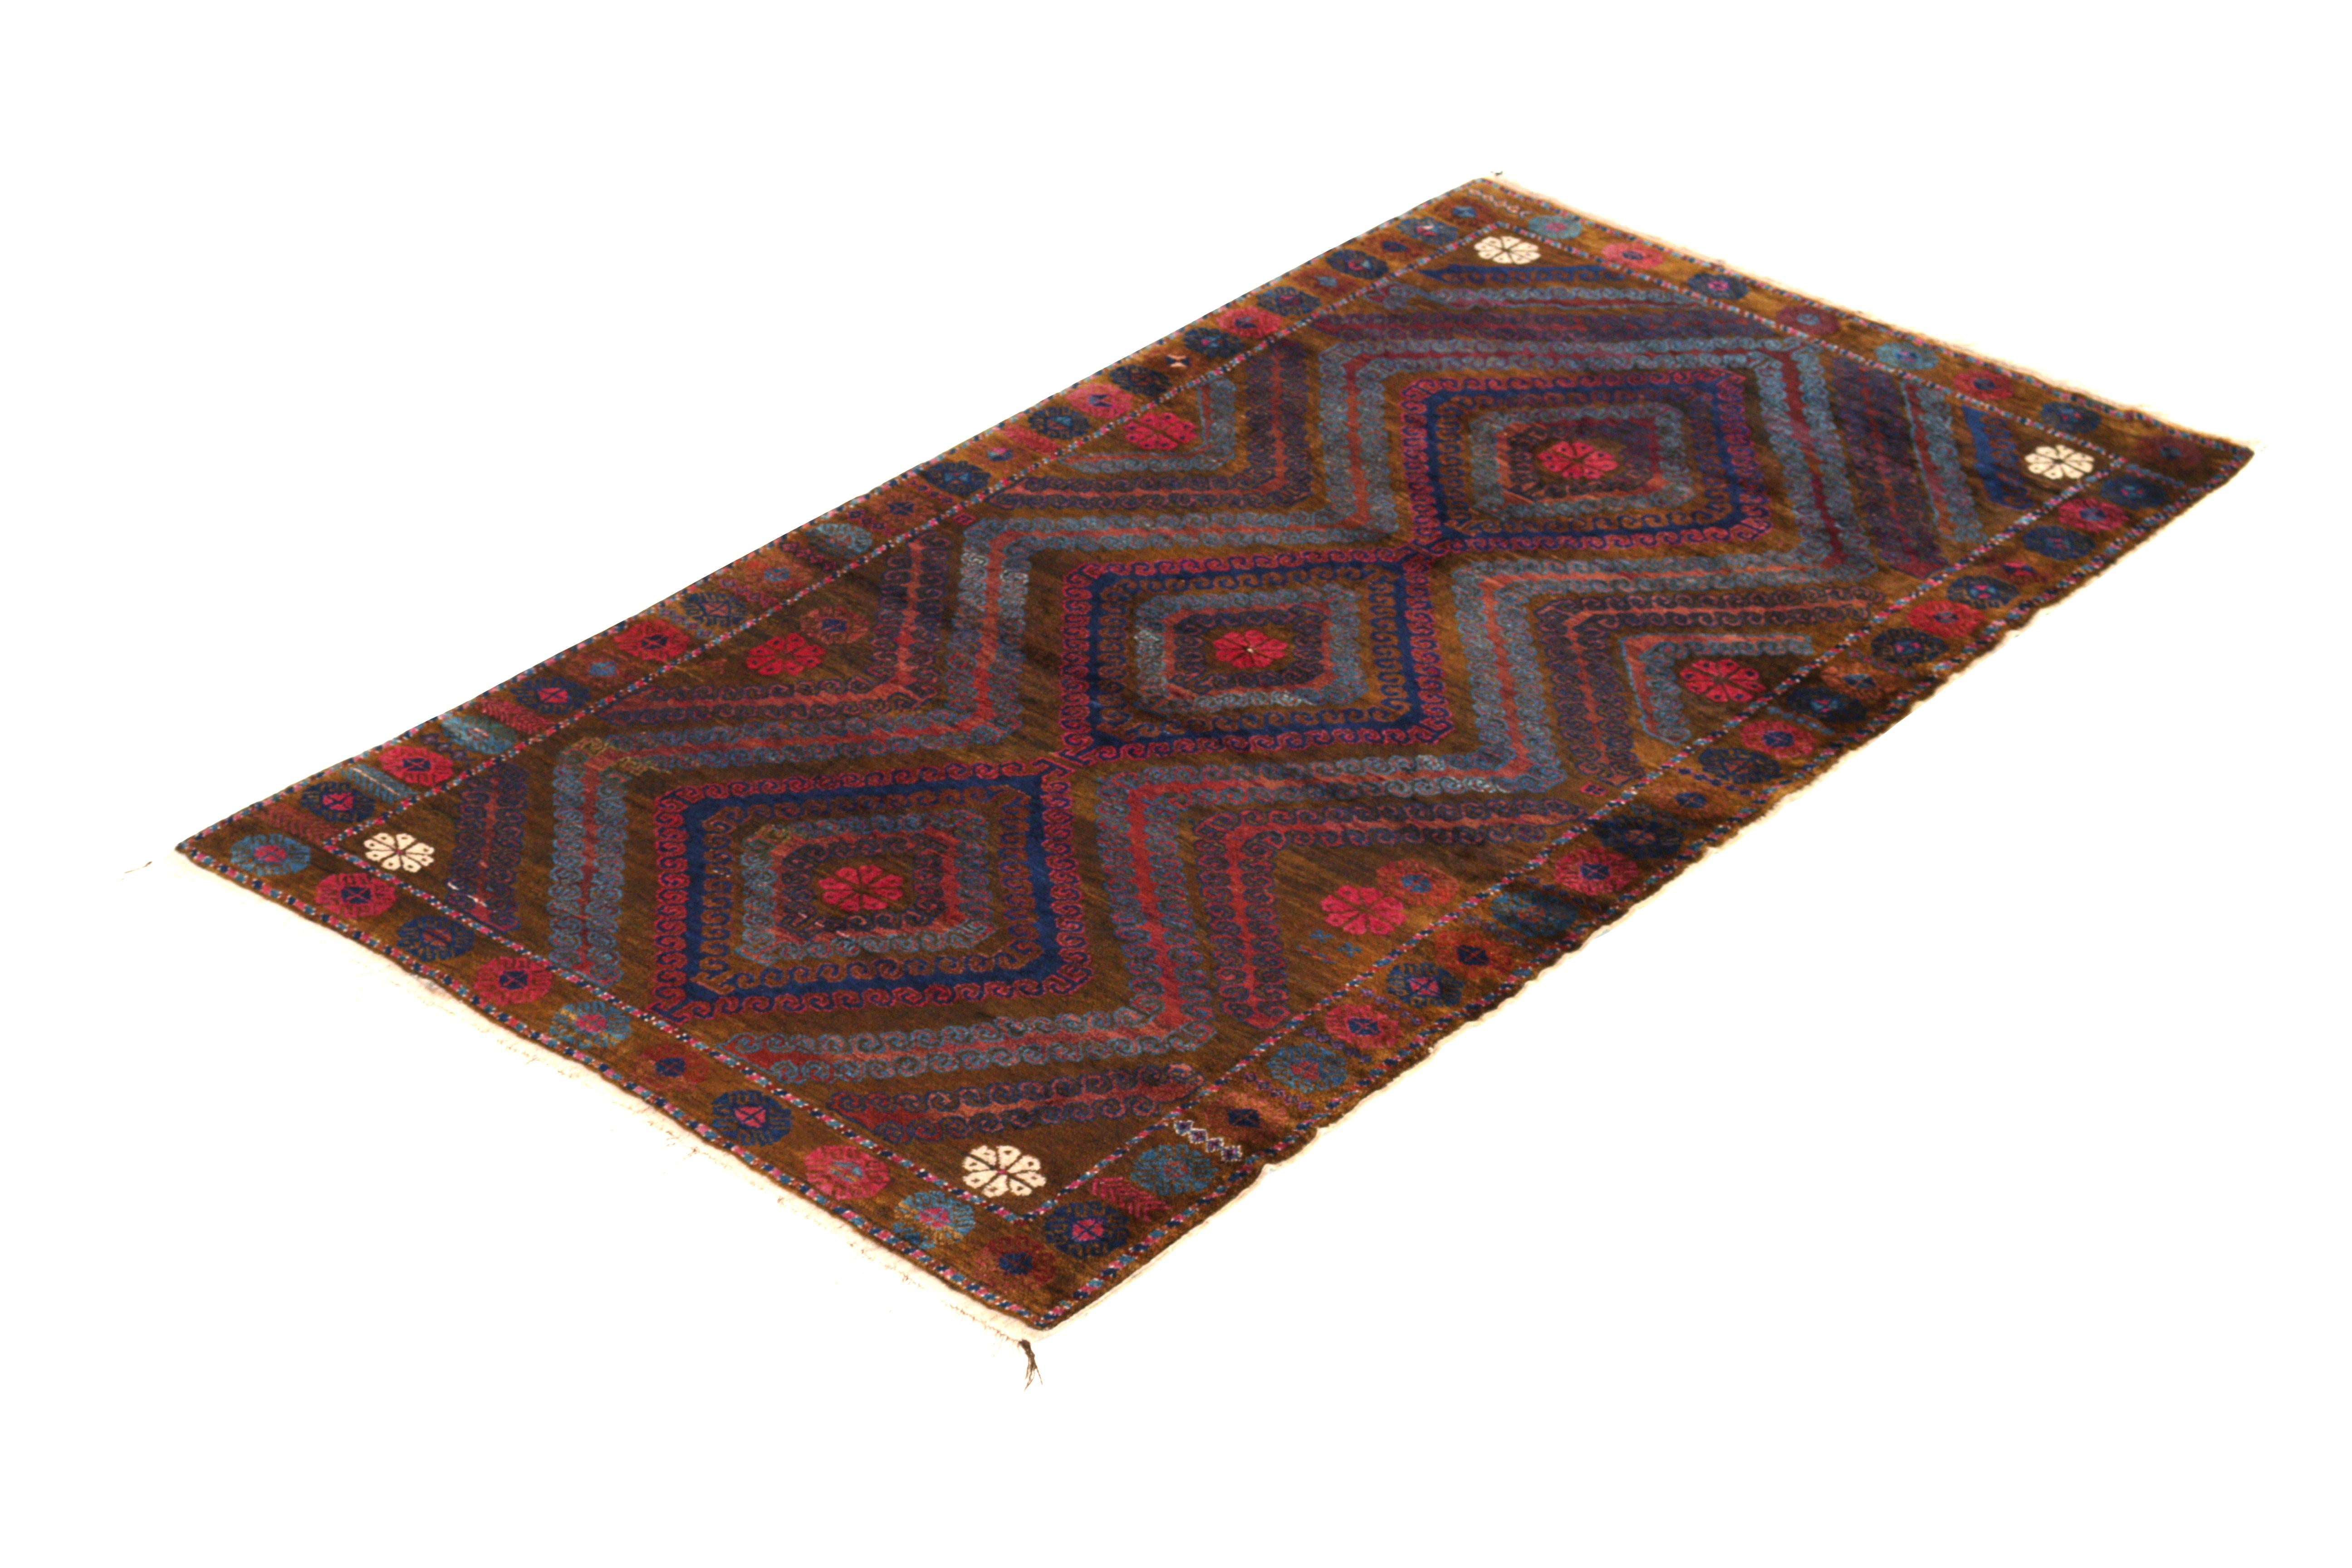 Hand knotted in wool originating circa 1950-1960, this vintage Persian rug connotes a midcentury Baluch tribal rug design with one of the most unique, appealing approaches to a transitional colorway we’ve seen among this antique lineage., enjoying